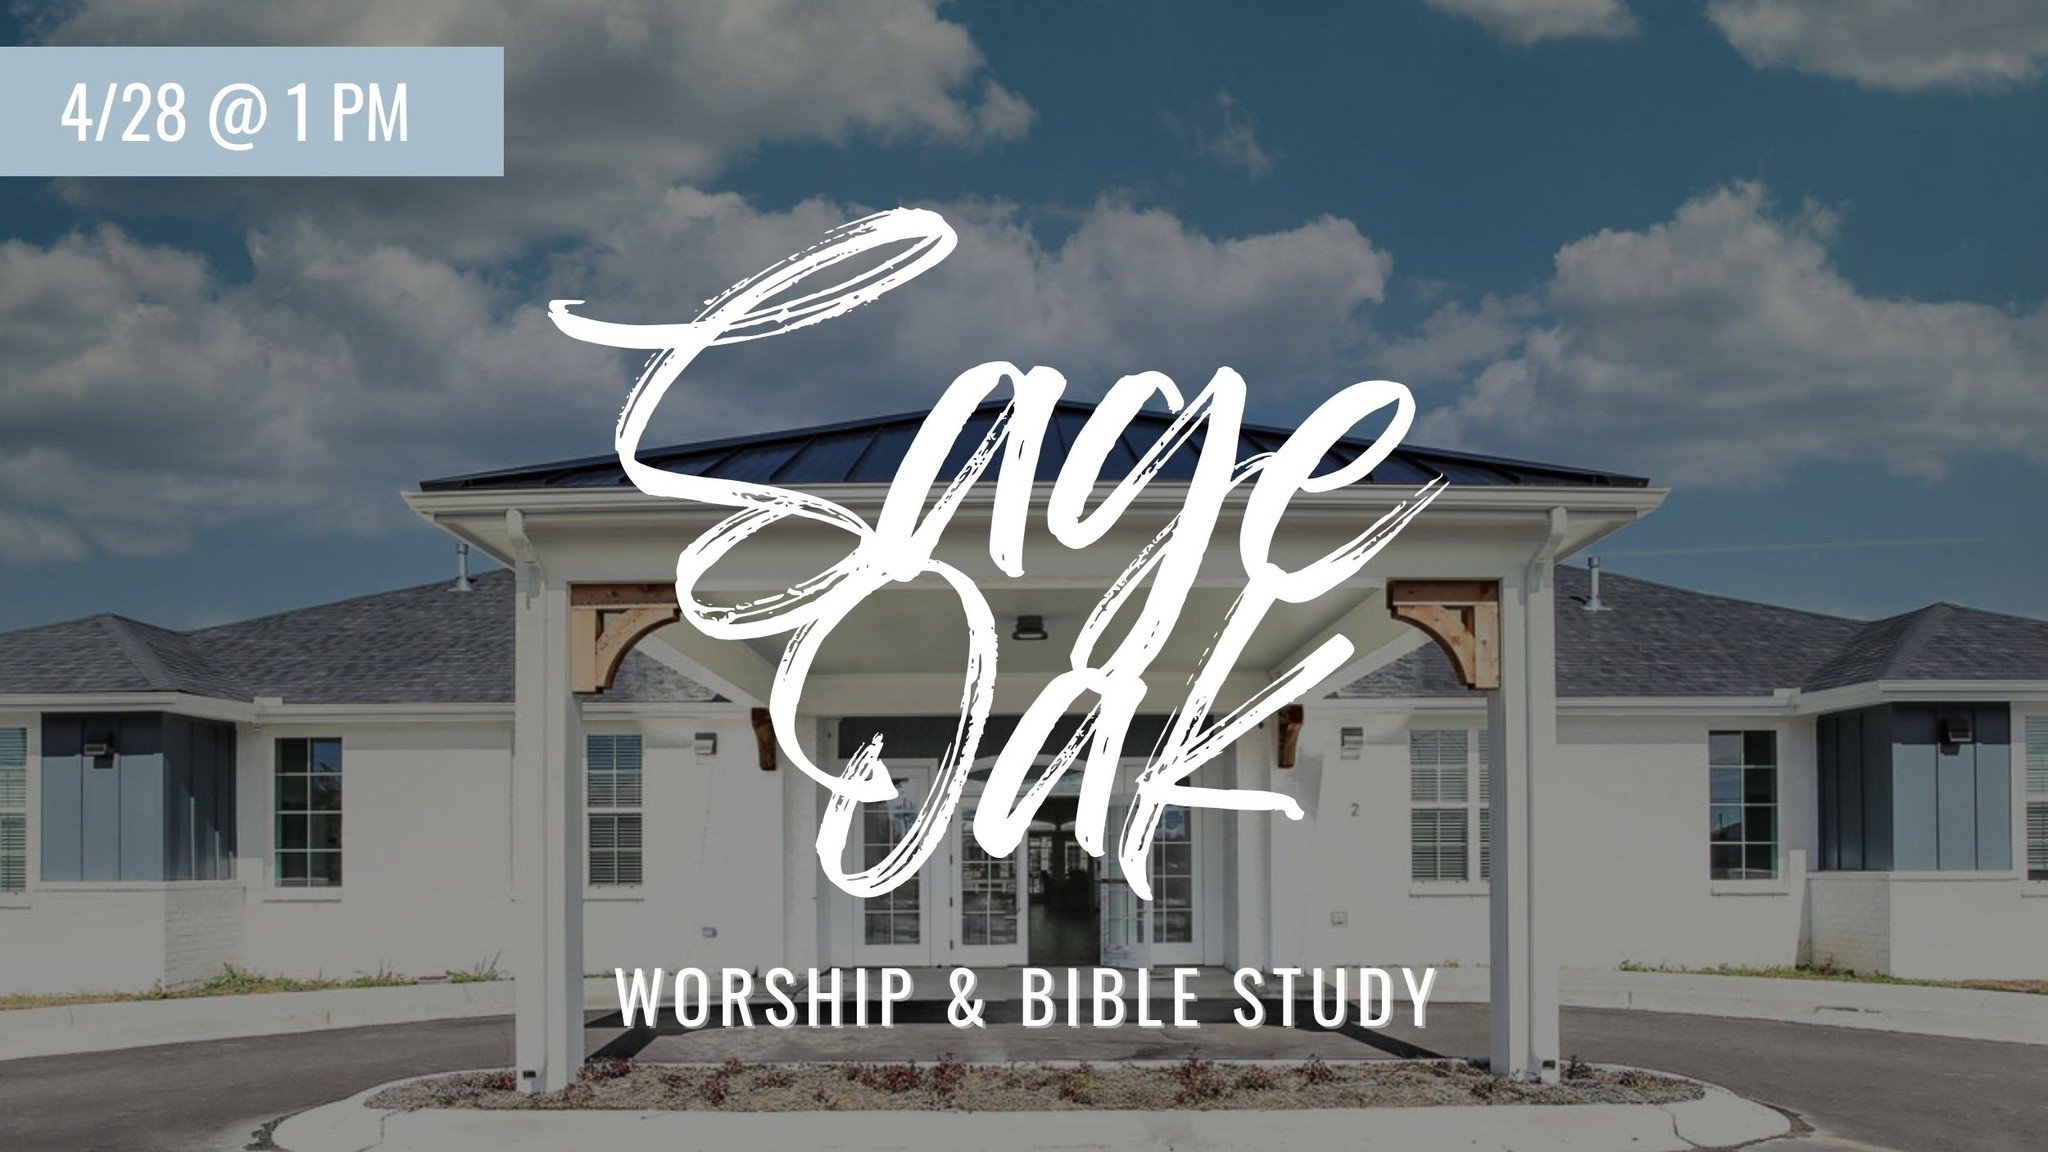 The residents of Sage Oak LOVE when our SSBC families join them for worship and Bible study once a month! The only thing missing is YOU! Sunday at 1 pm, we'll be there.